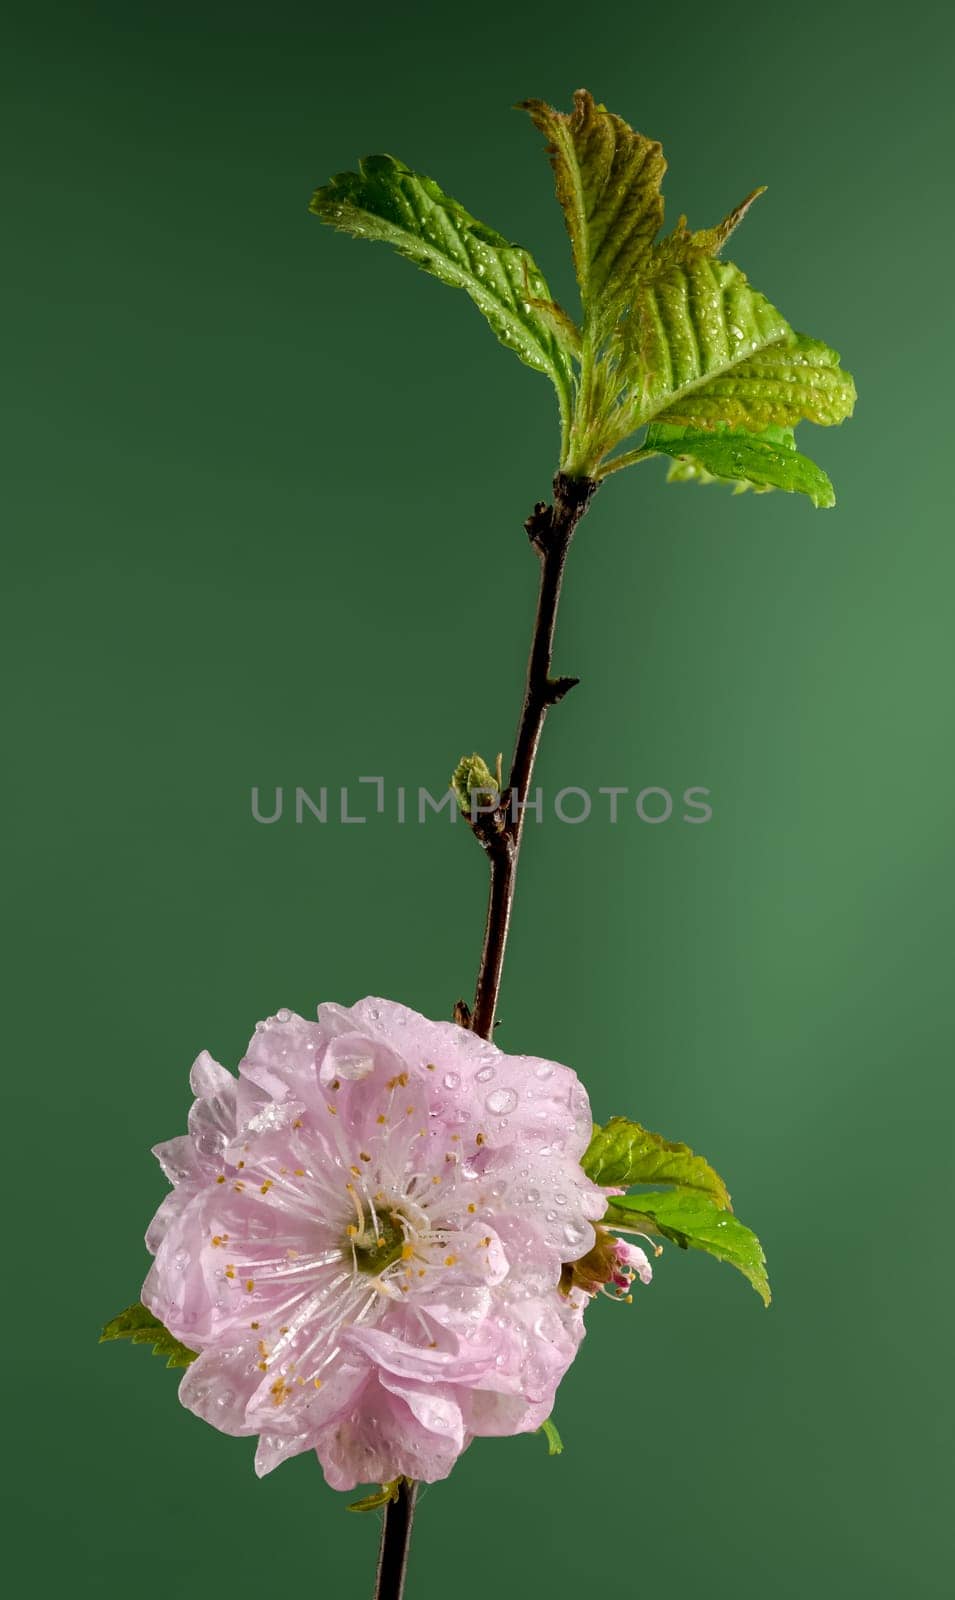 Blooming Almond Prunus triloba tree flowers on a green background by Multipedia